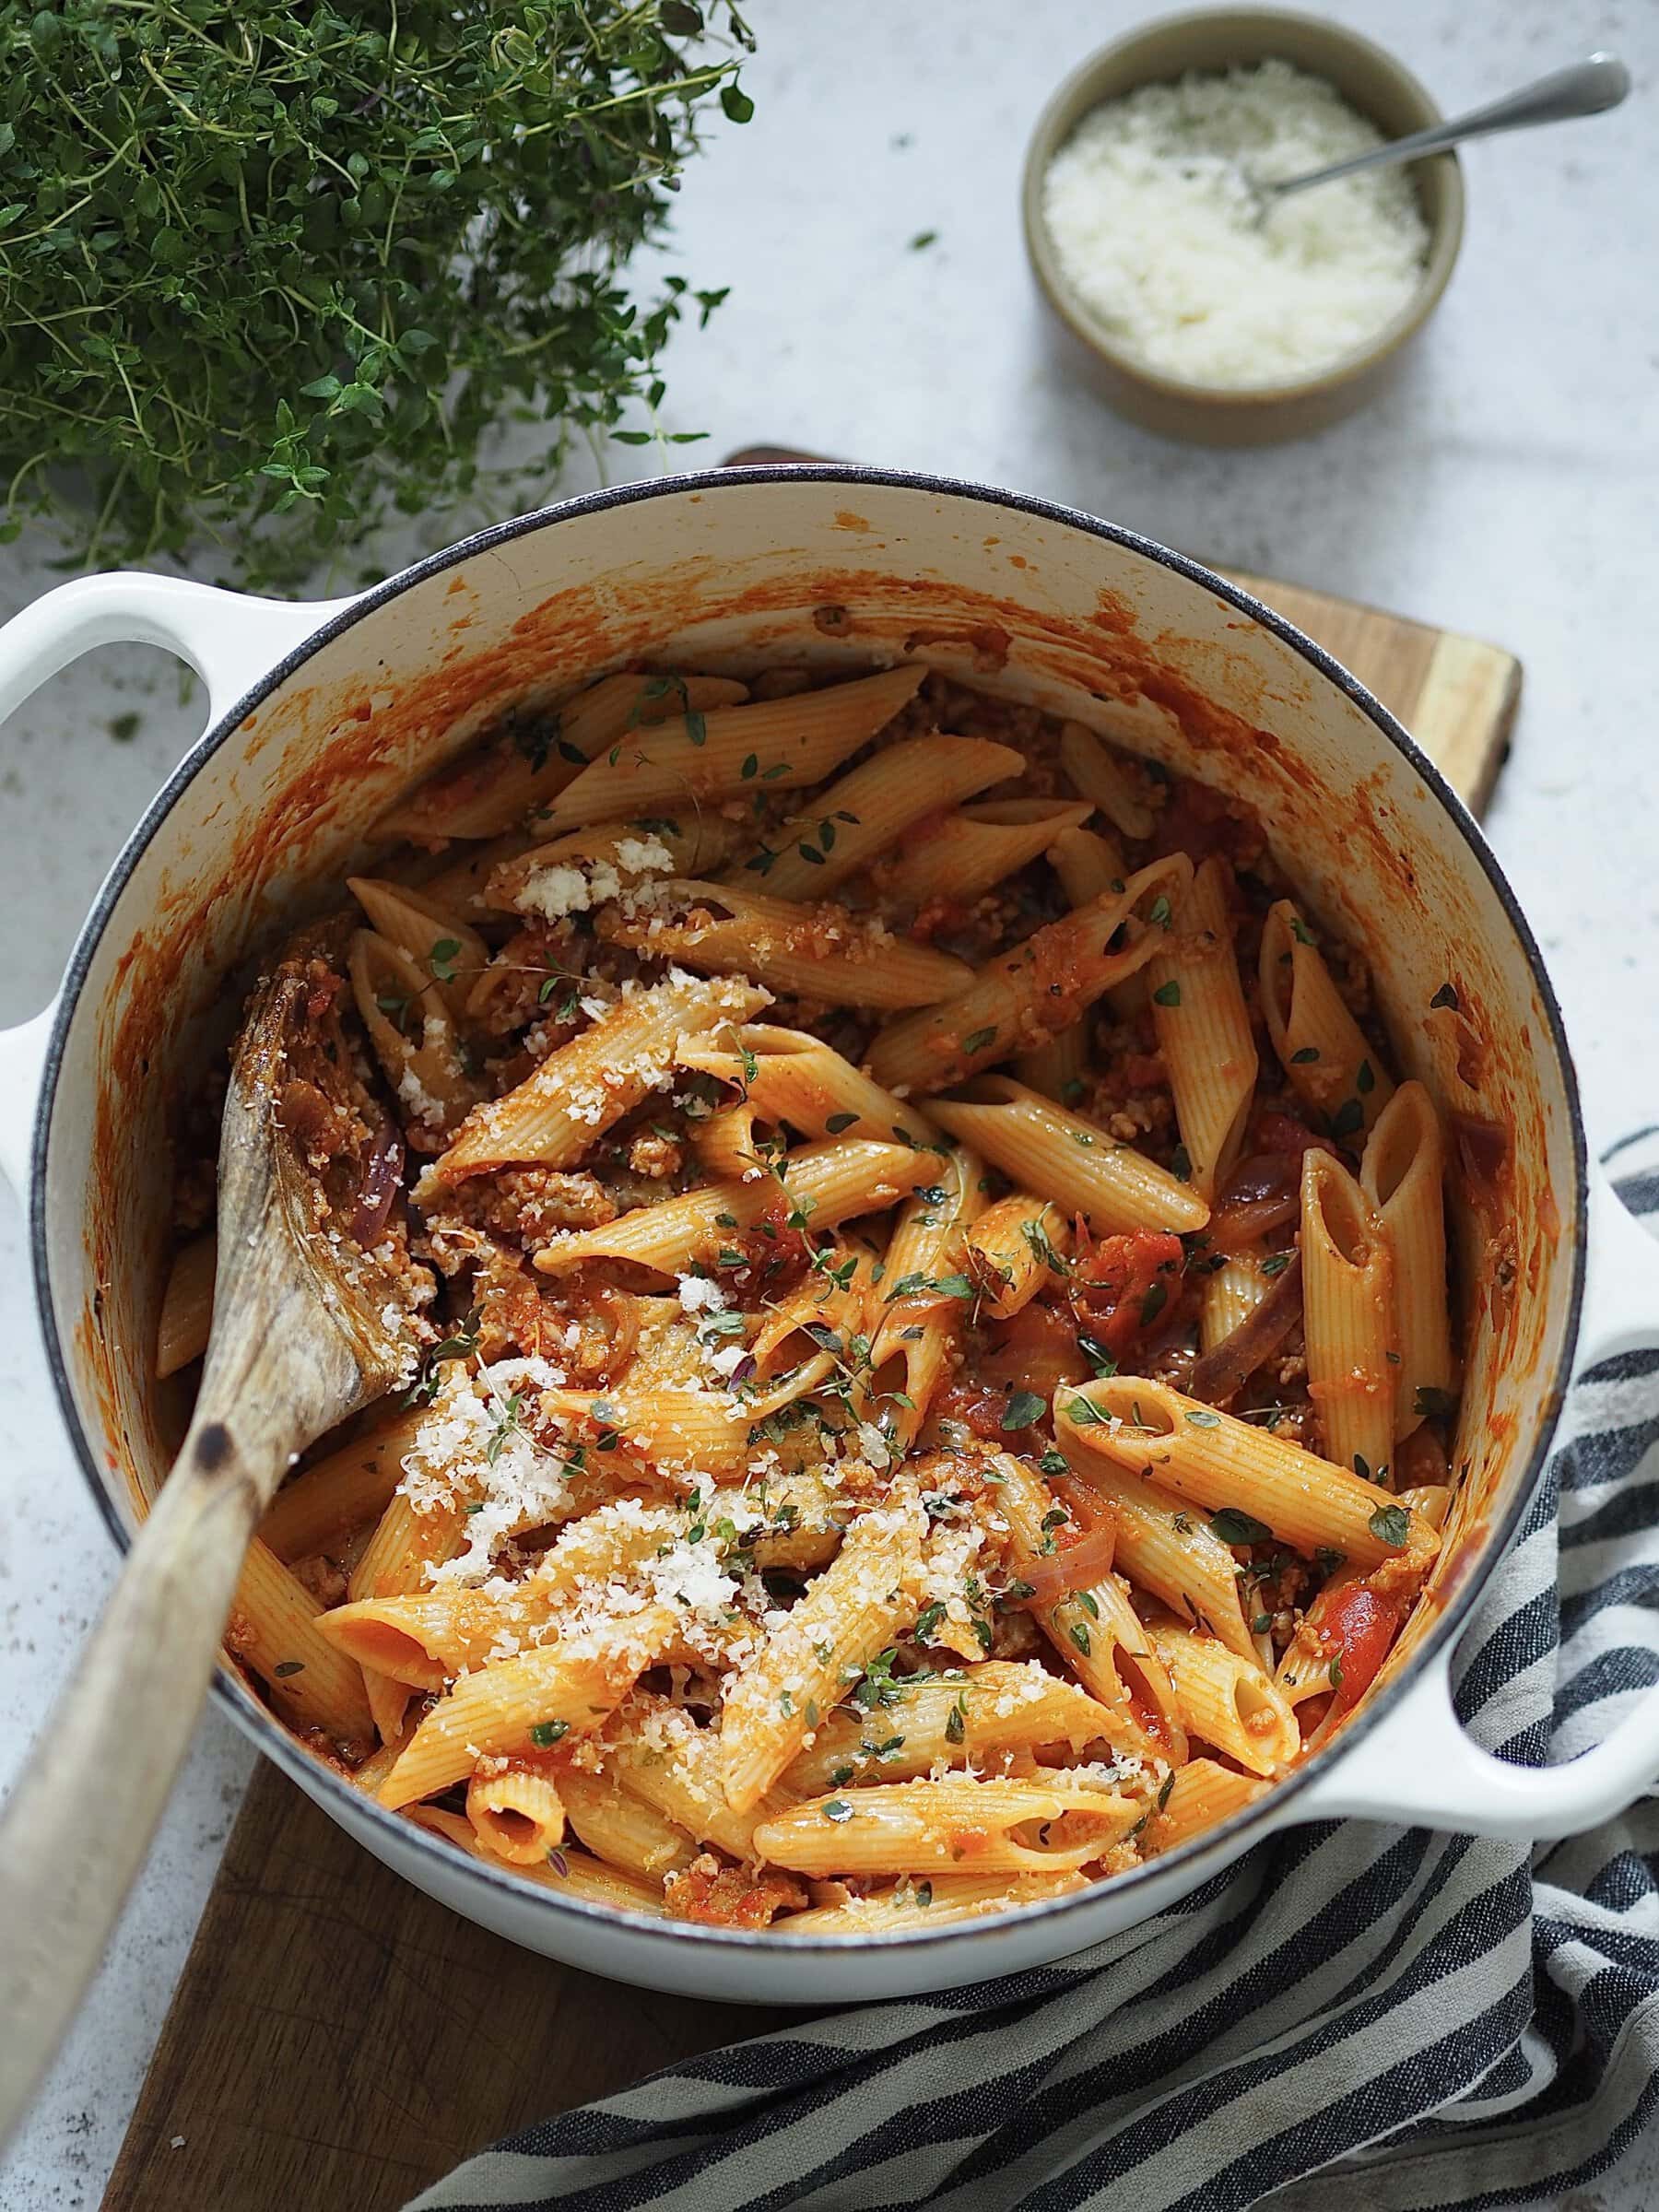 Penne with sausage ragu and grated cheese in a white casserole dish.